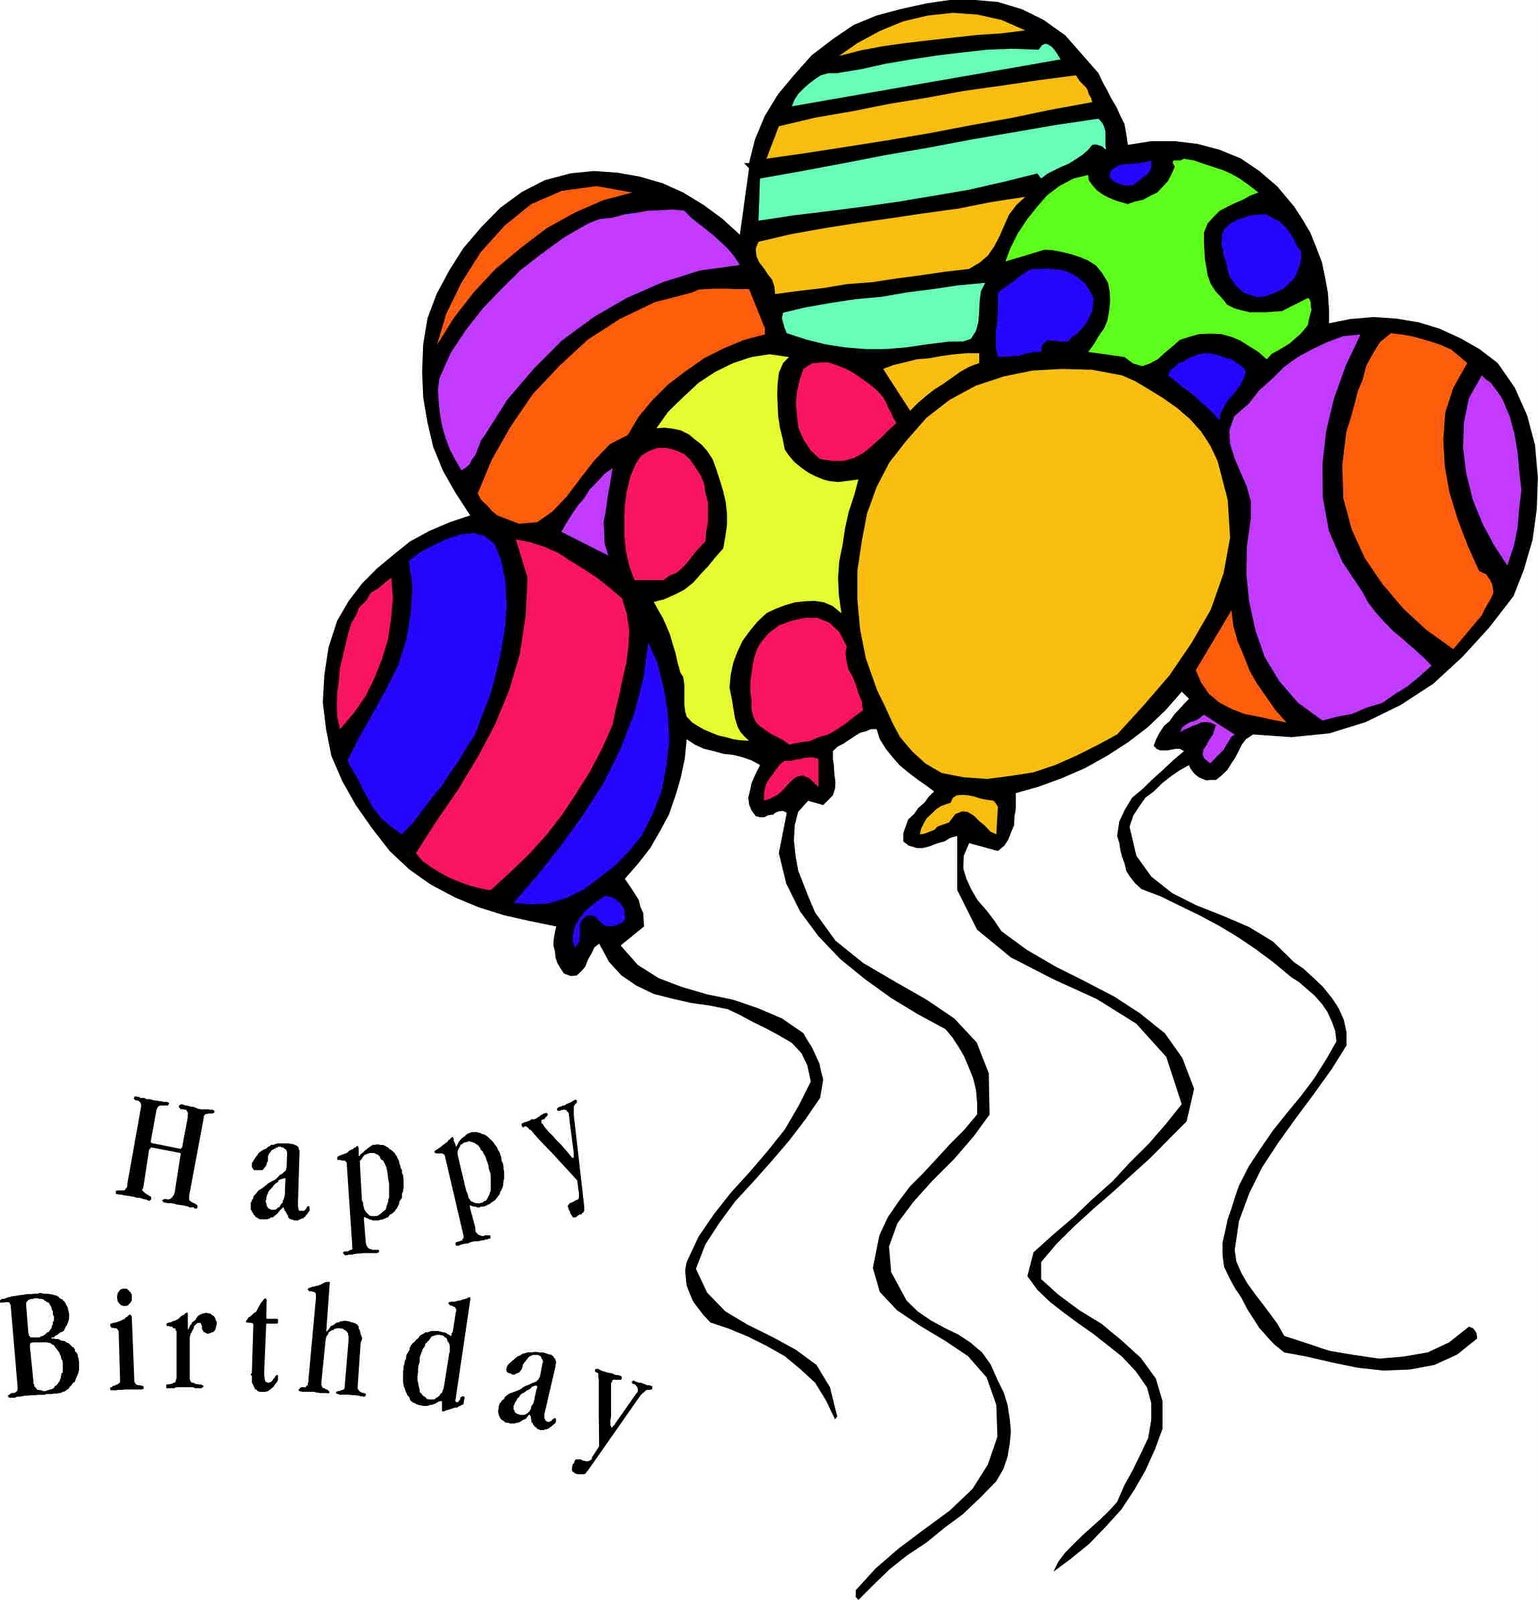 Free birthday free clipart for happy birthday clipart clipartix 2